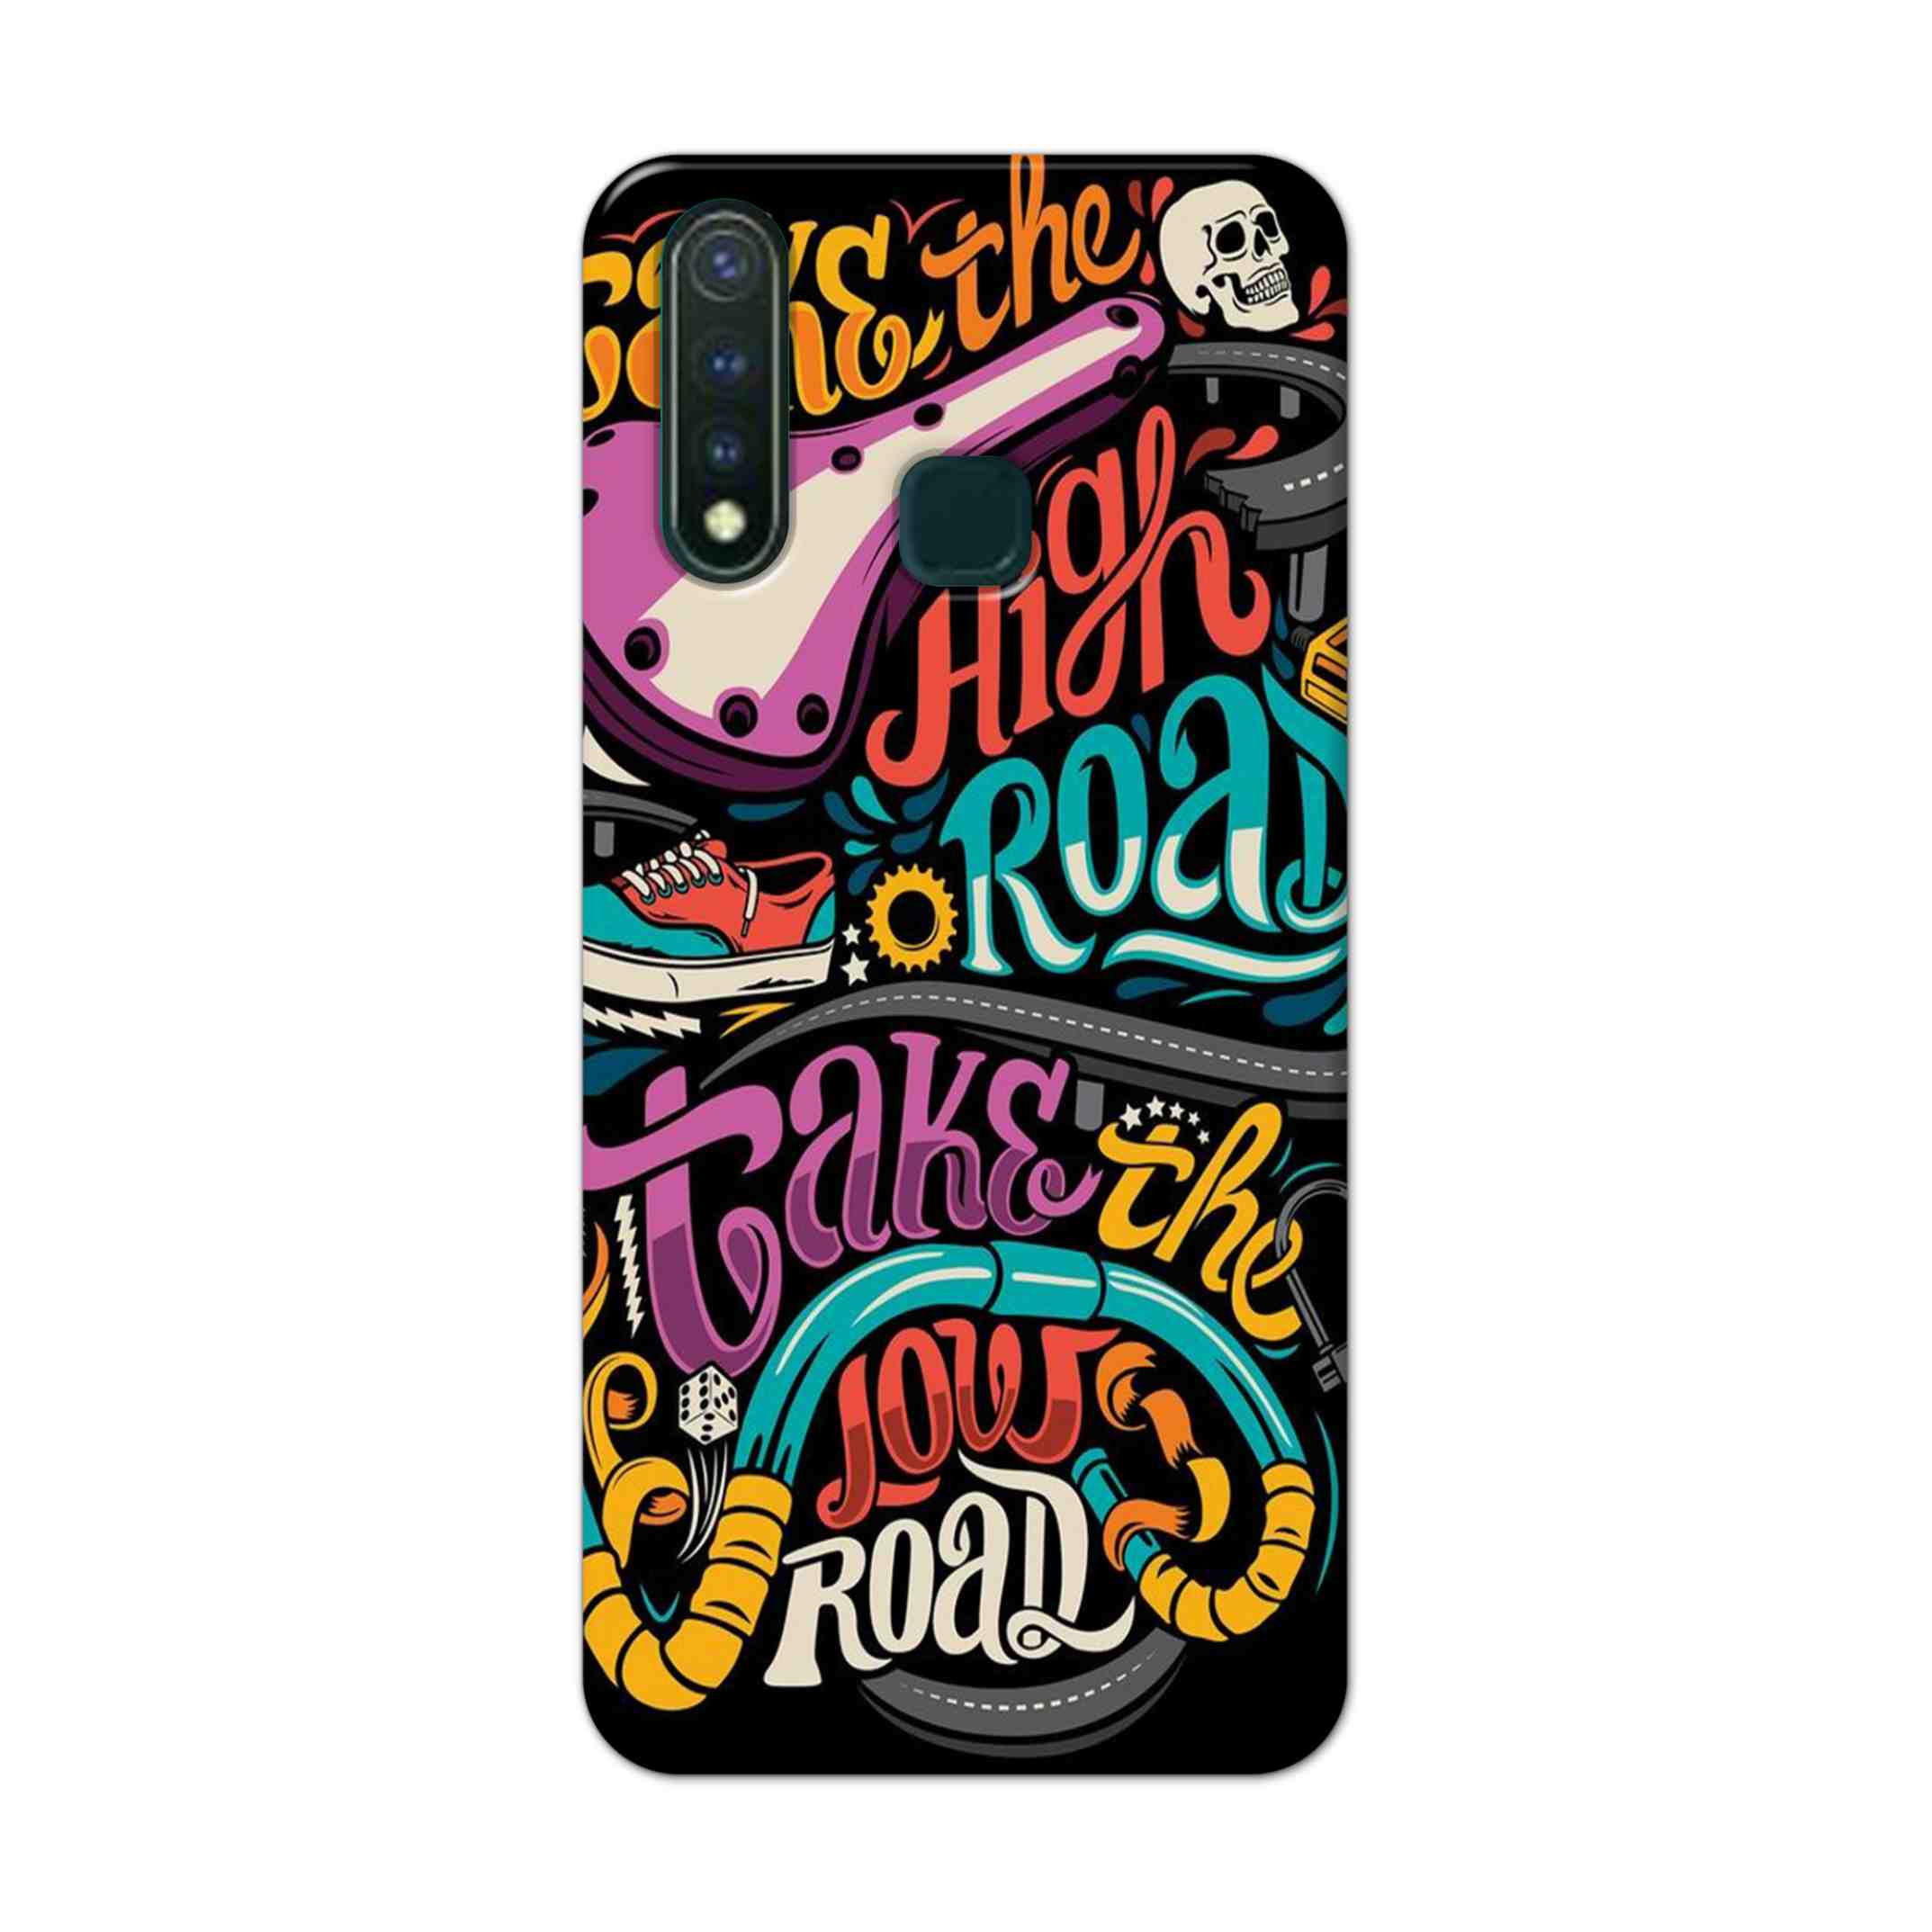 Buy Take The High Road Hard Back Mobile Phone Case Cover For Vivo Y19 Online